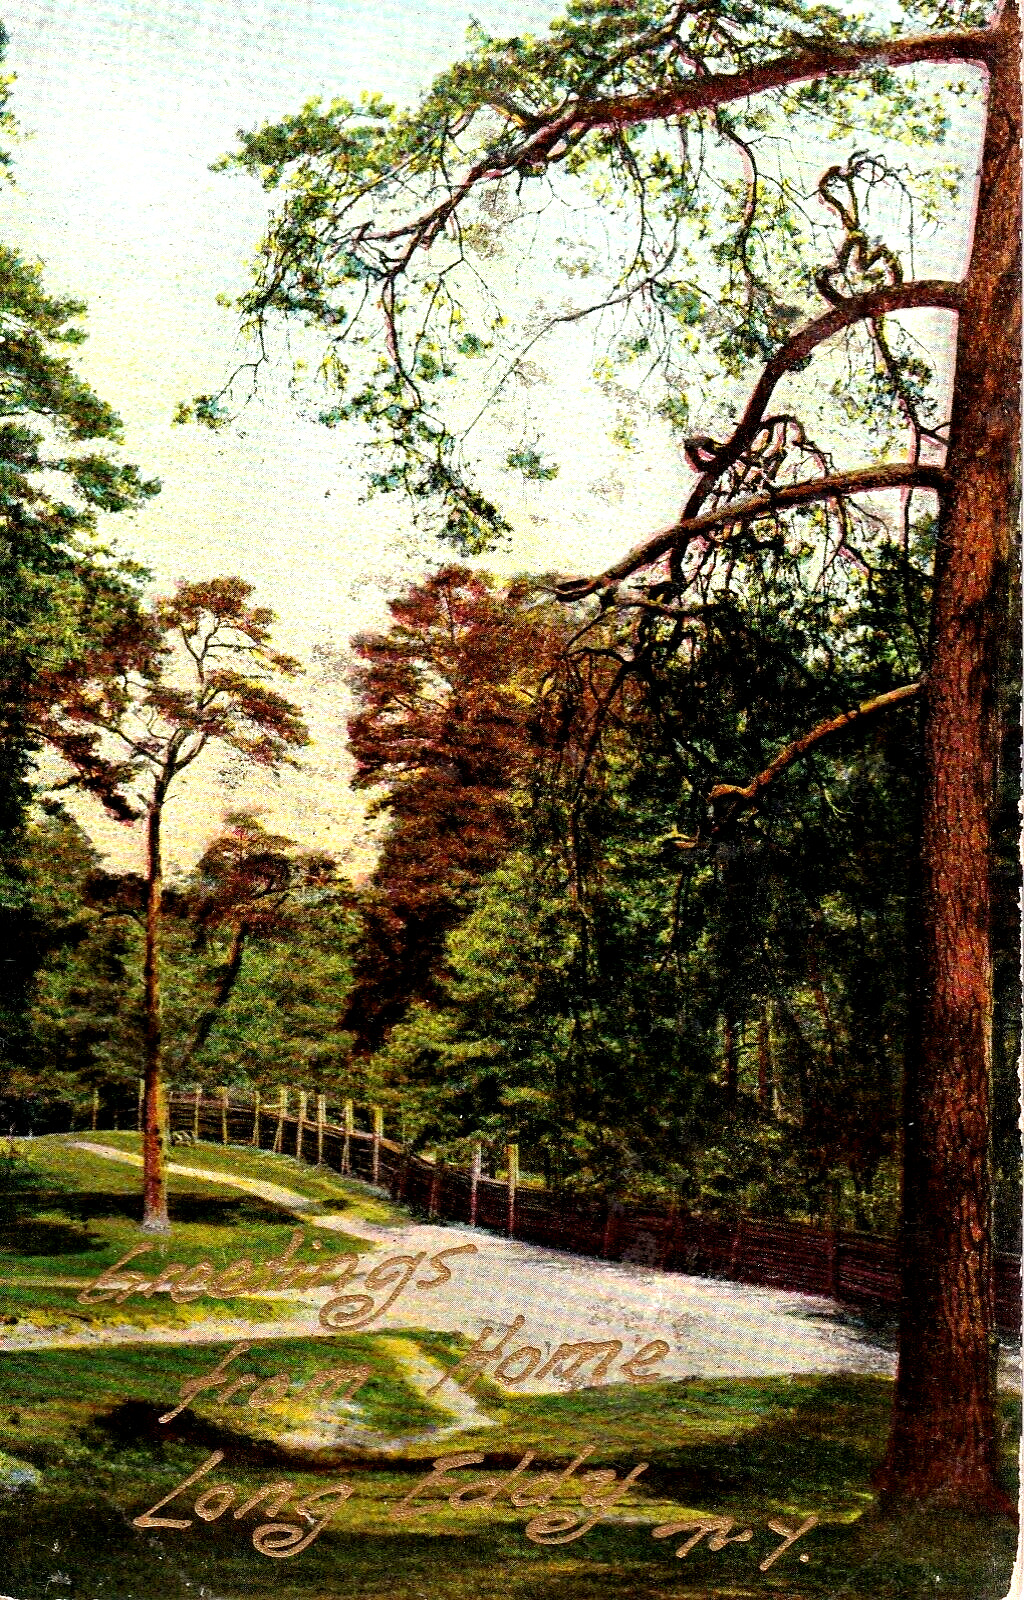 Postcard 1909 Long Eddy New York, Gold-toned Ink says 'Greetings' Park, Woods